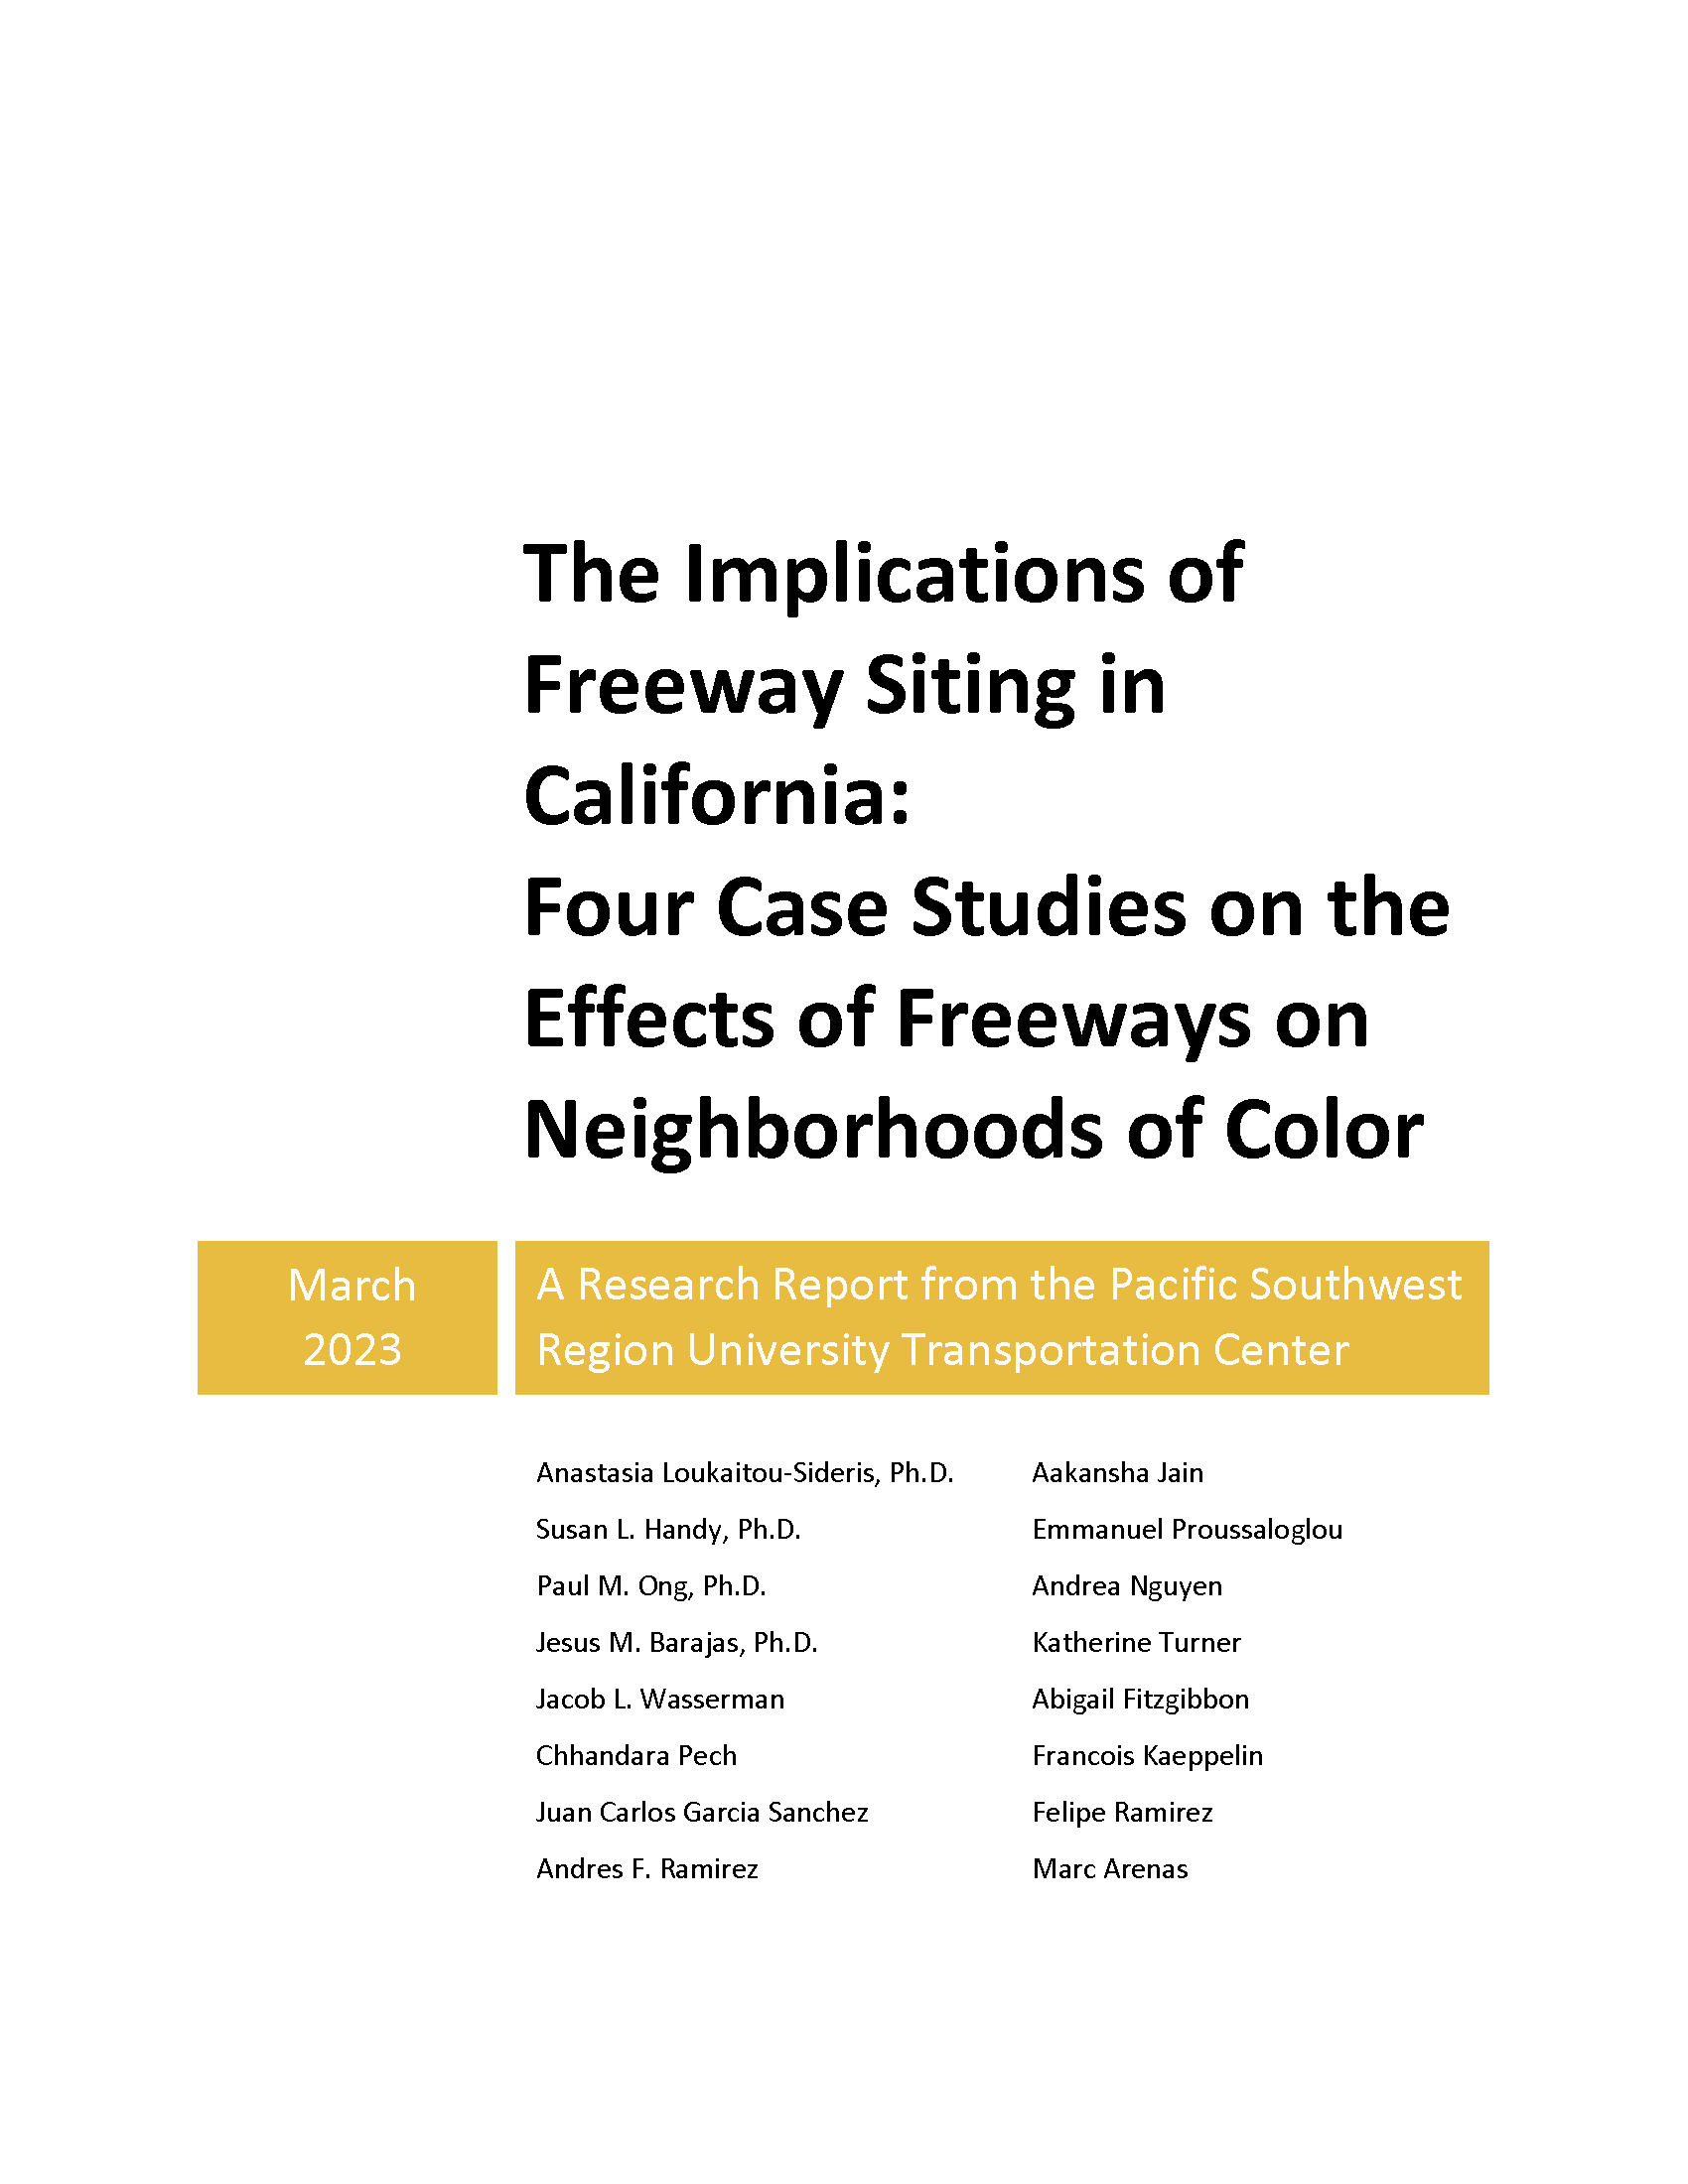 The Implications of Freeway Siting in California: Four Case Studies on the Effects of Freeways on Neighborhoods of Color